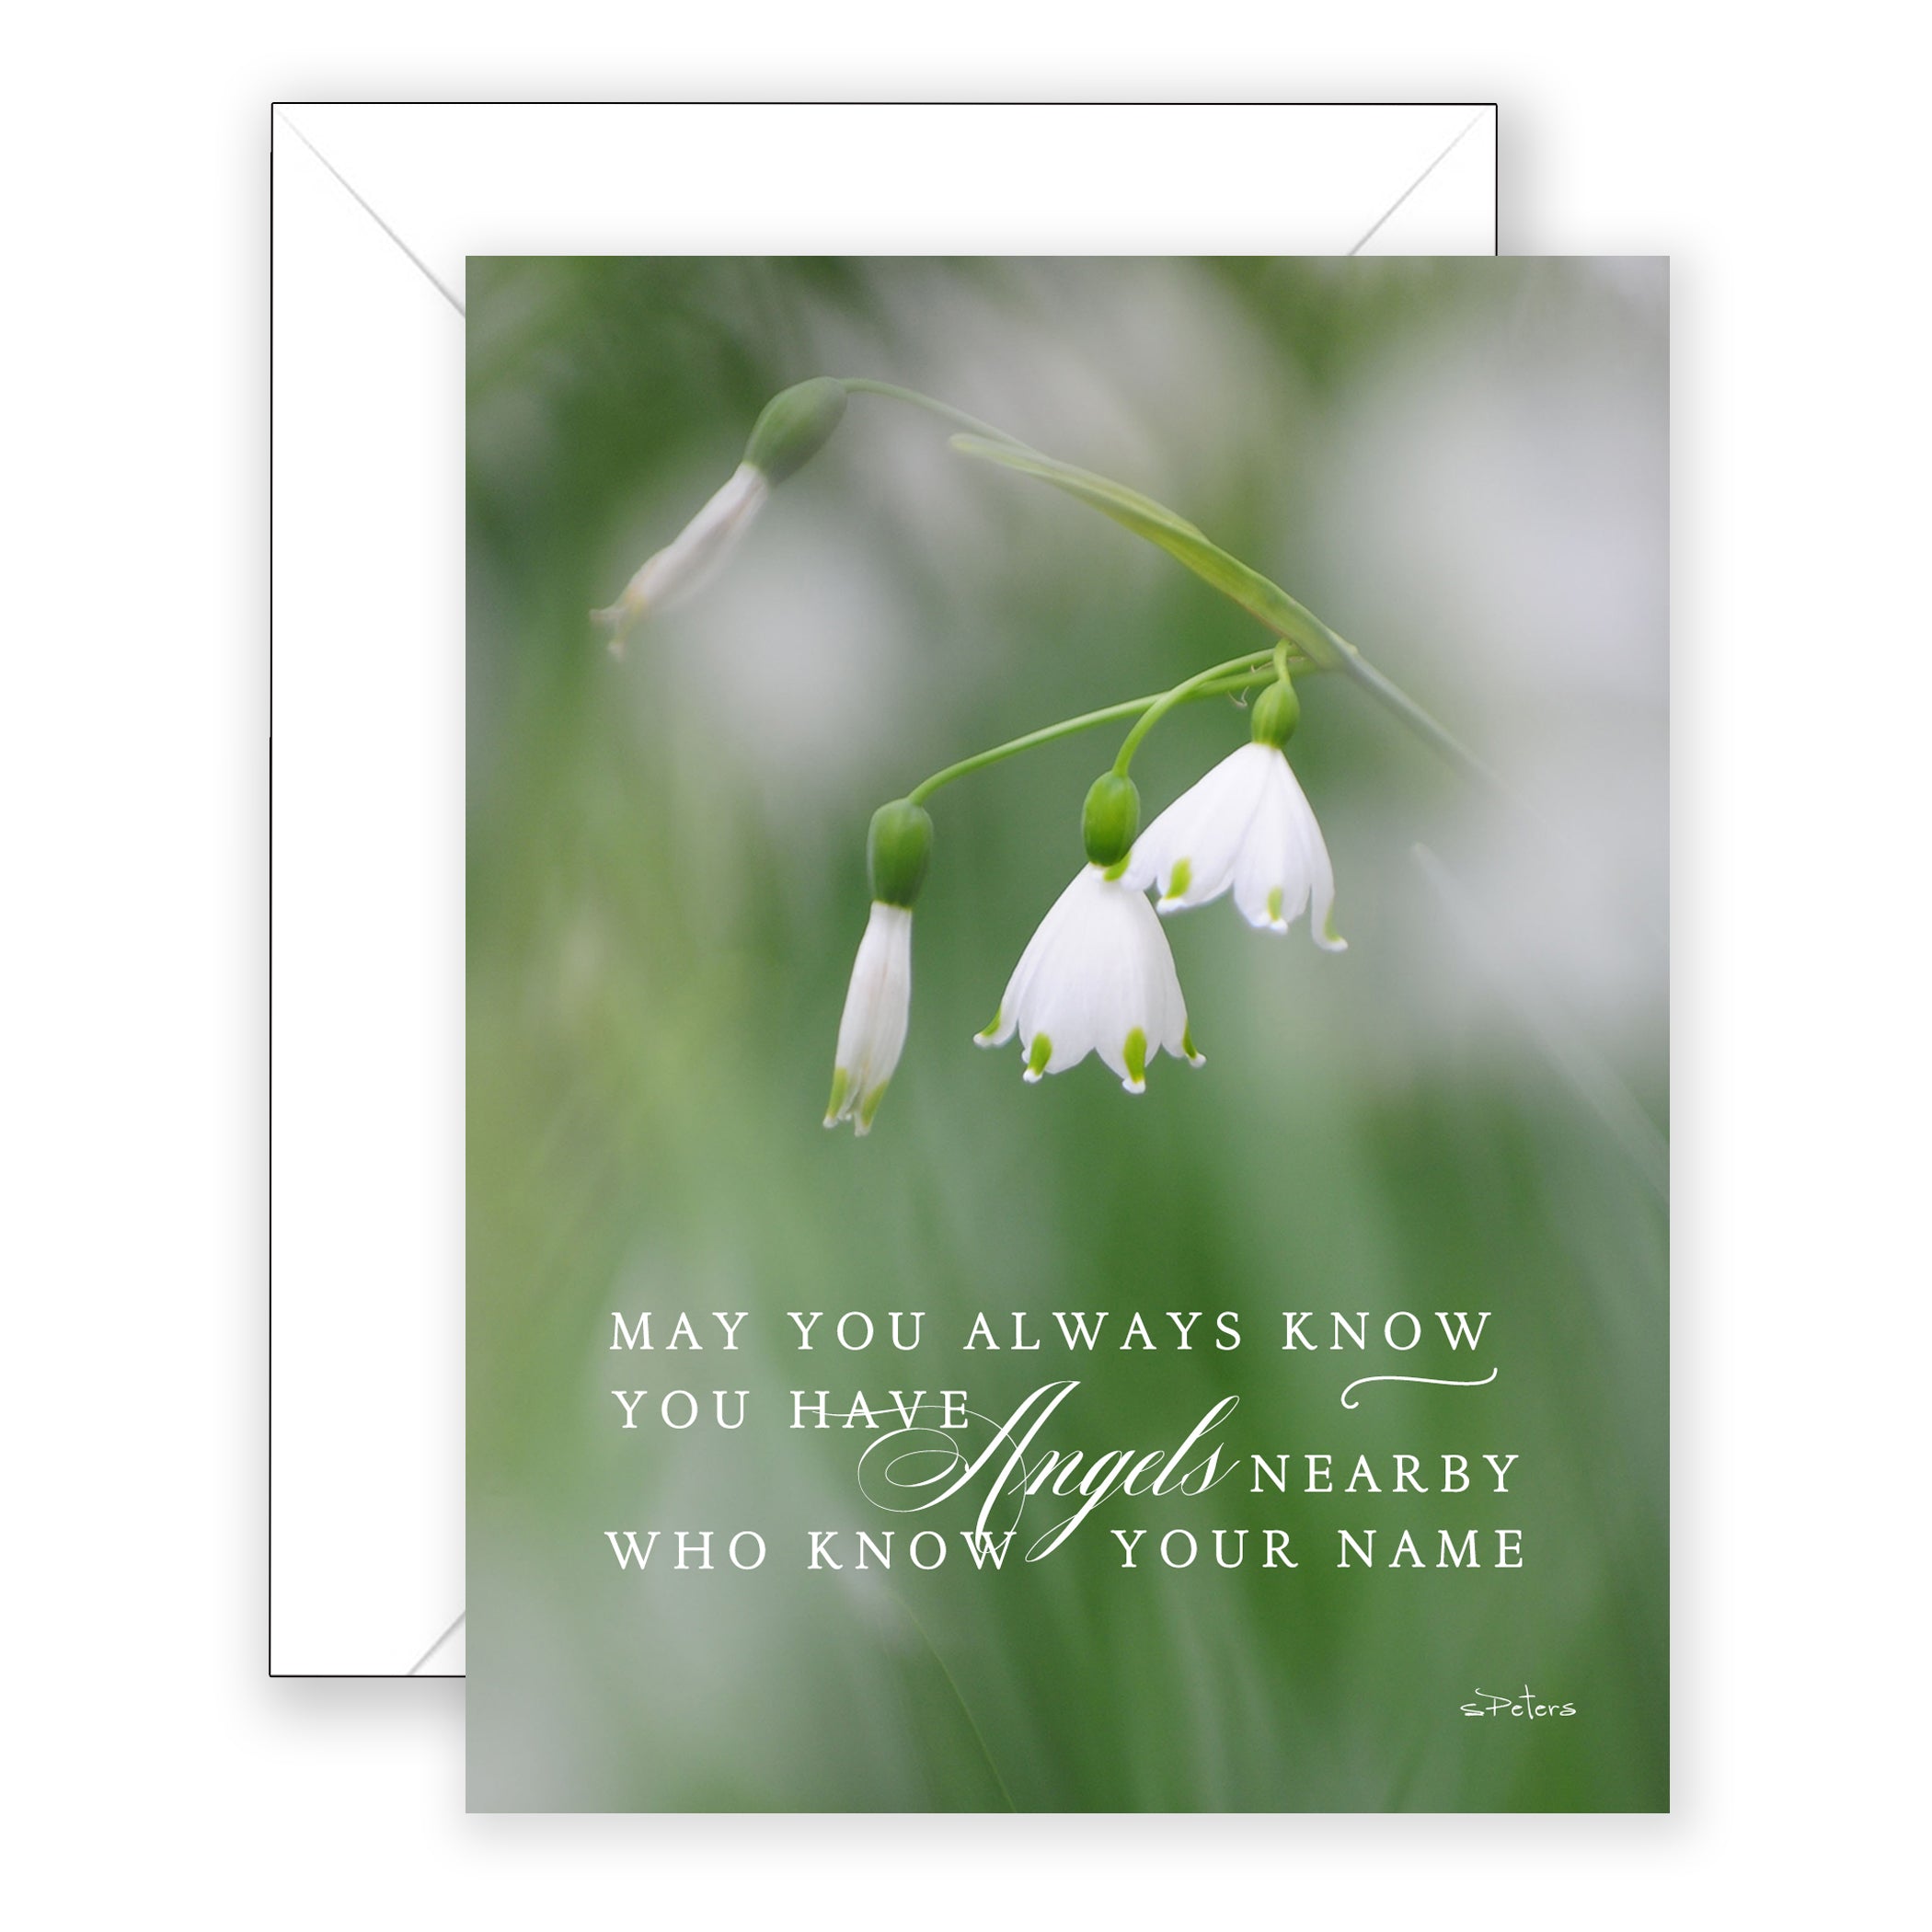 Angels Near (Psalm 91:11) - Praying for You Card